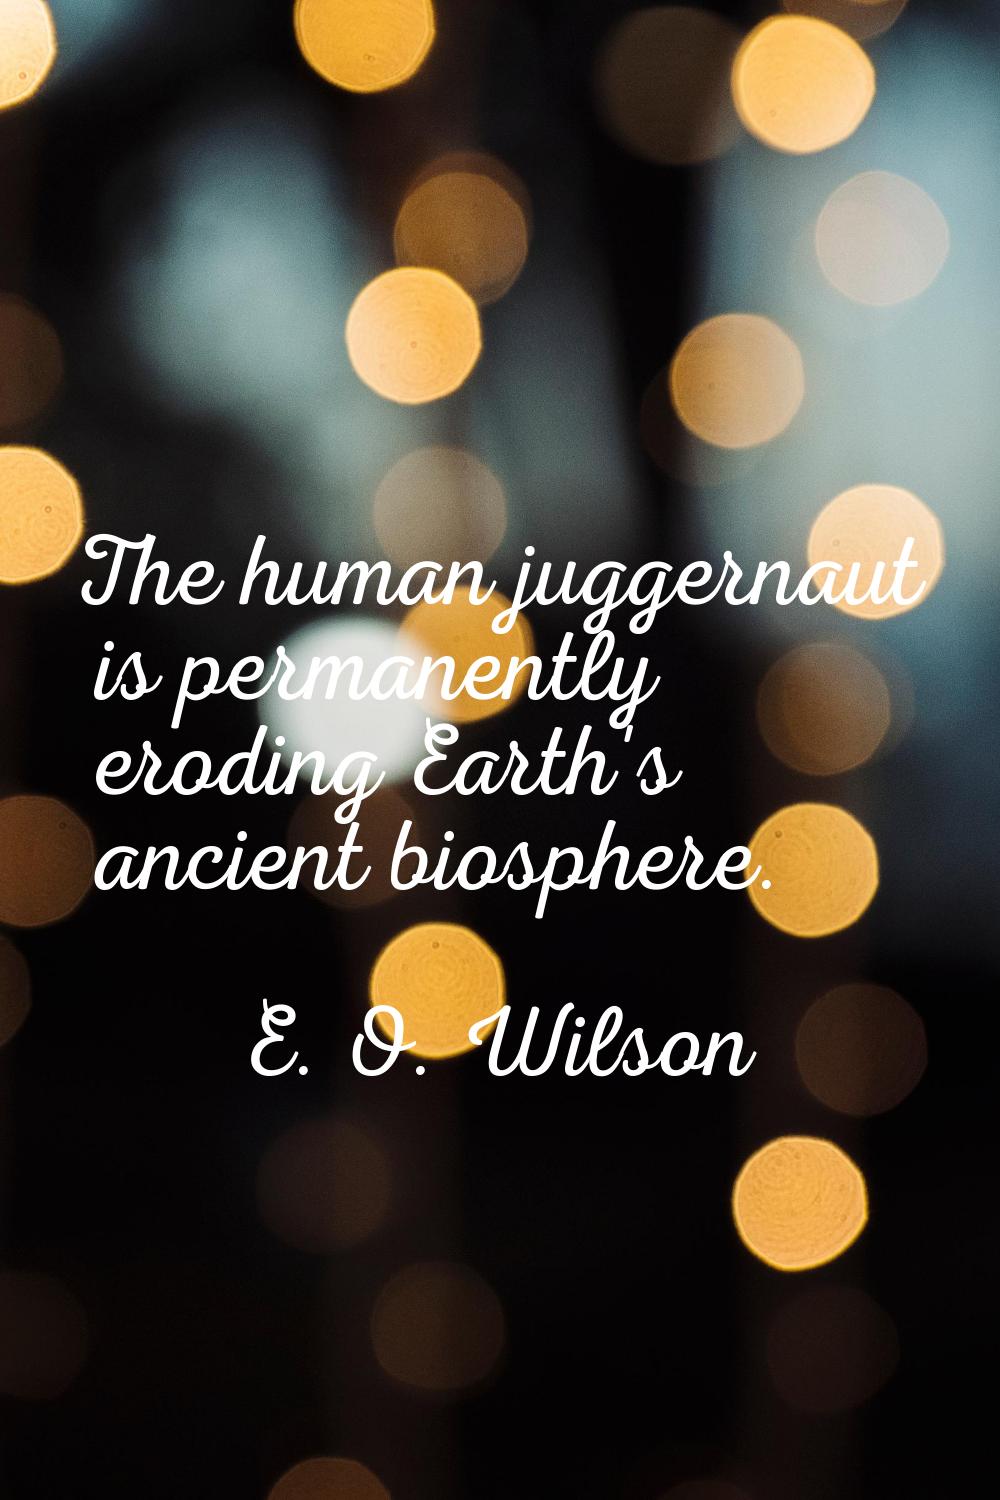 The human juggernaut is permanently eroding Earth's ancient biosphere.